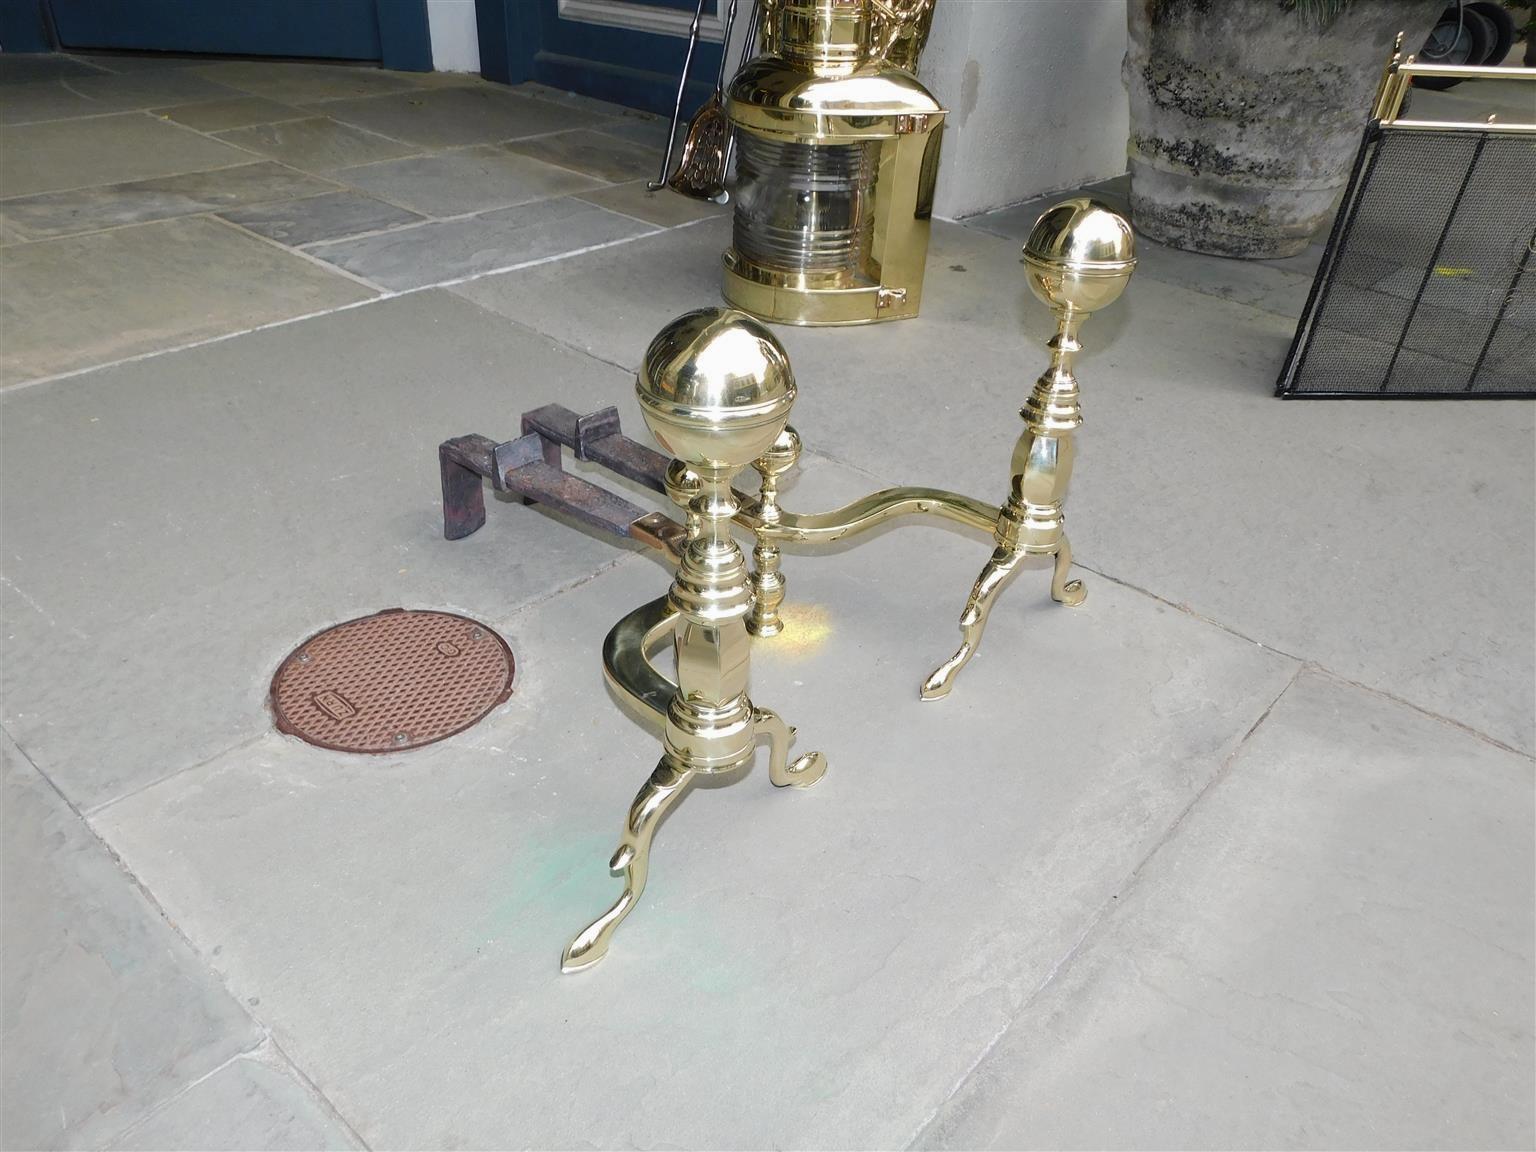 Pair of American brass ball banded finial andirons with ringed turned faceted plinths, supporting curvature matching ball log stops, original rear wrought iron dog legs, and resting on double spur legs with slipper feet. Stamped John Molineux,